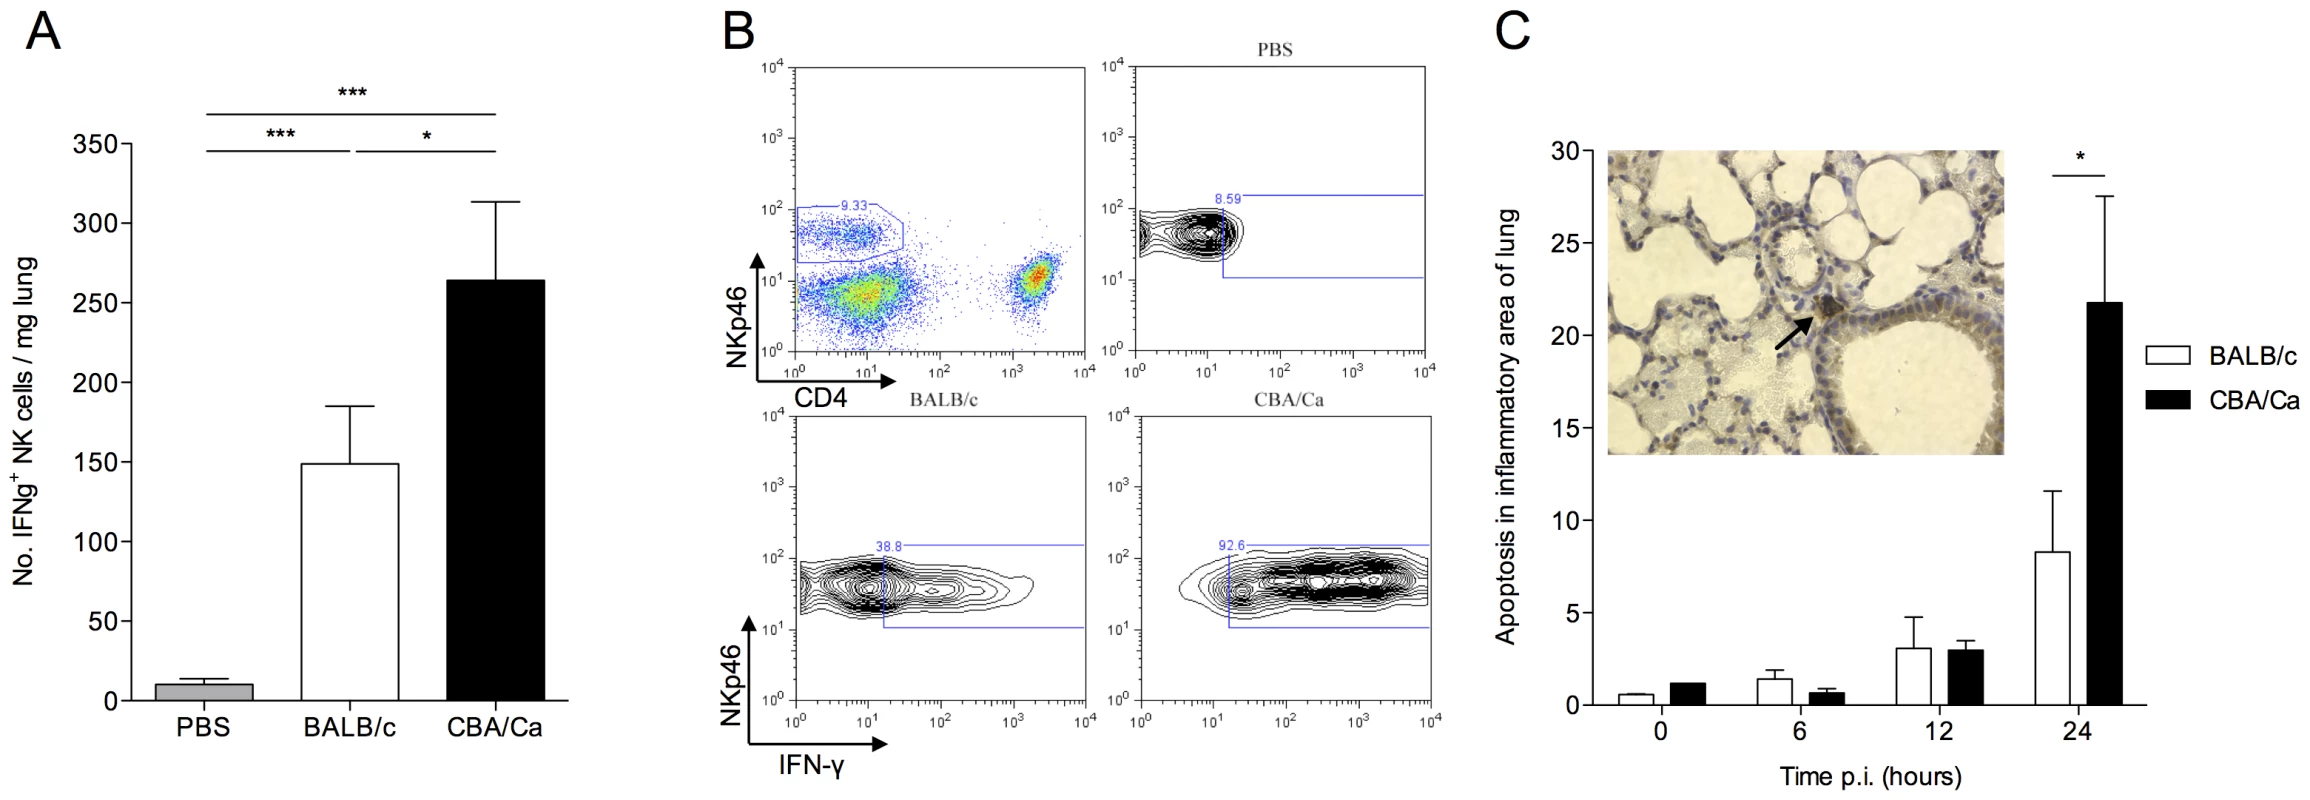 CBA/Ca mice display uncontrolled lung inflammation and associated apoptosis following <i>S. pneumoniae</i> infection.